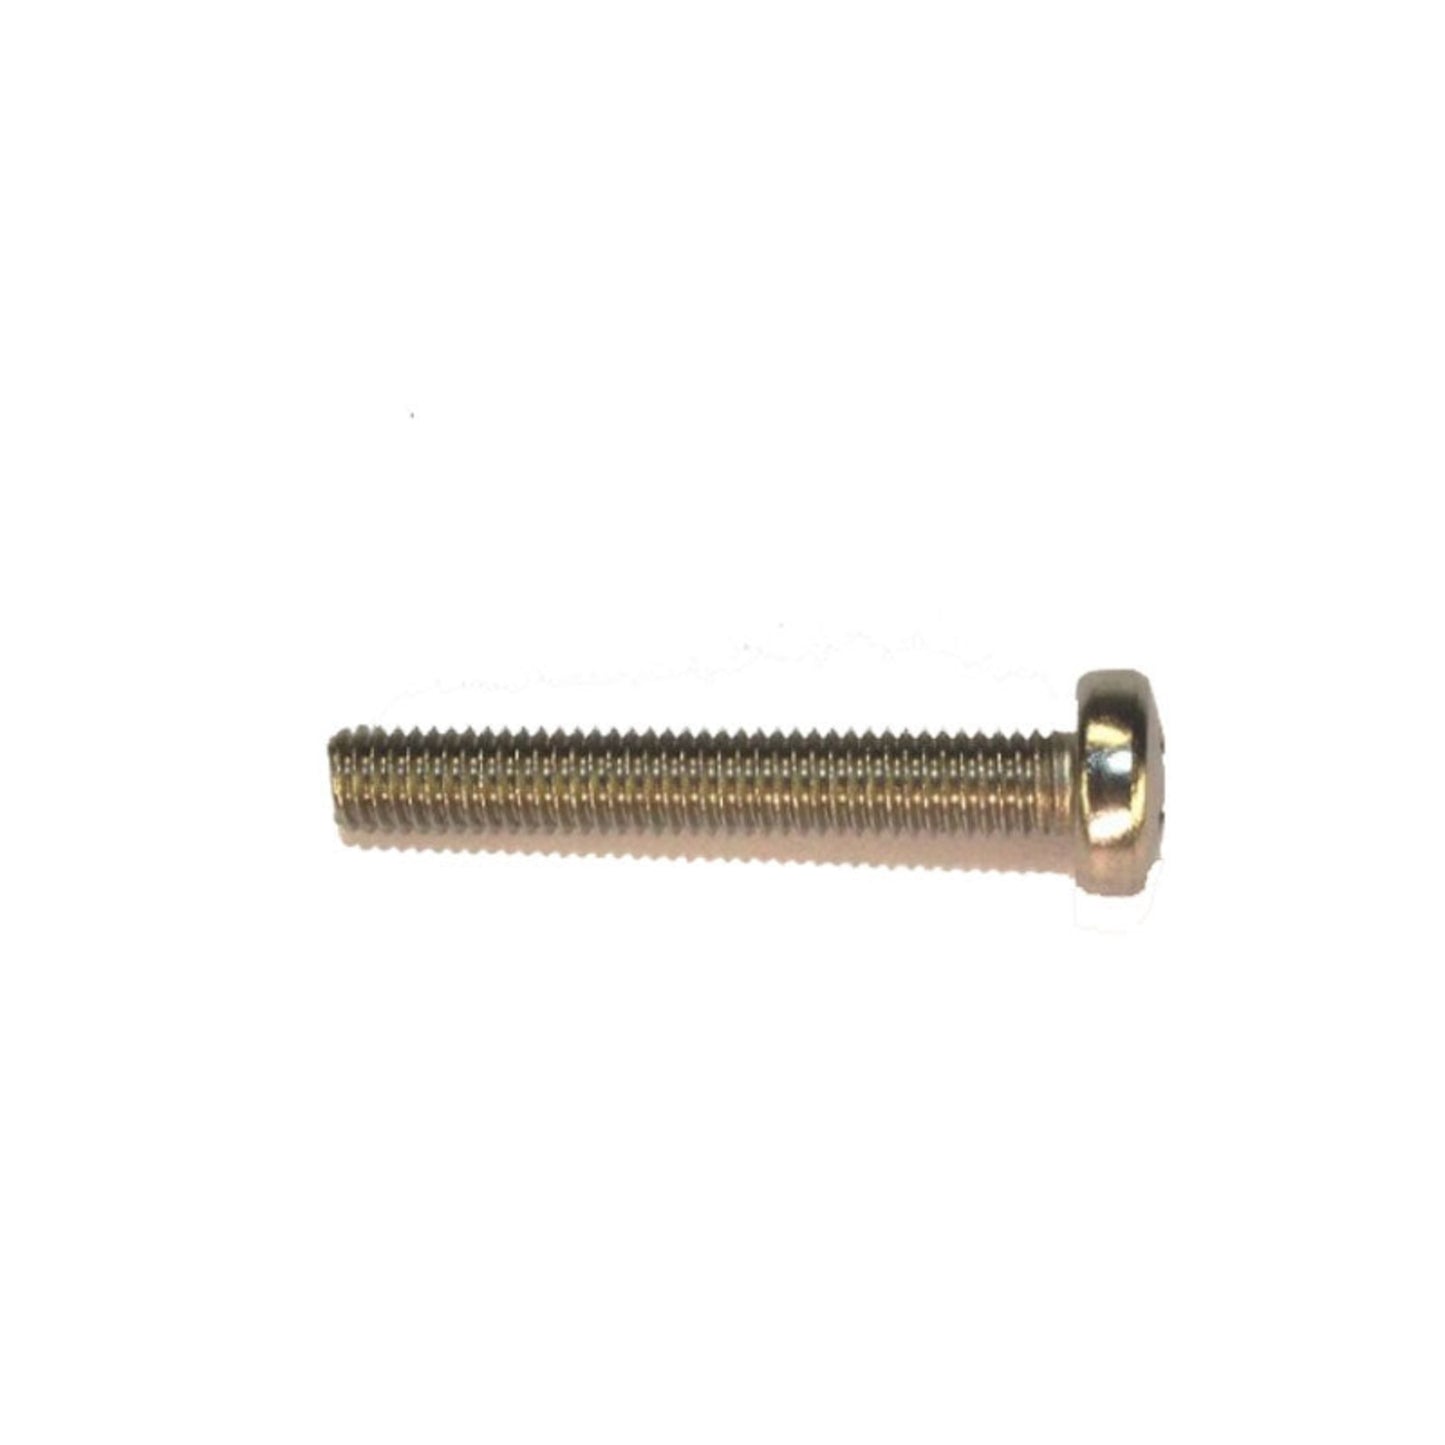 Oase Oval Head Screw V2A DIN 7985 M5x20mm Pack of 4